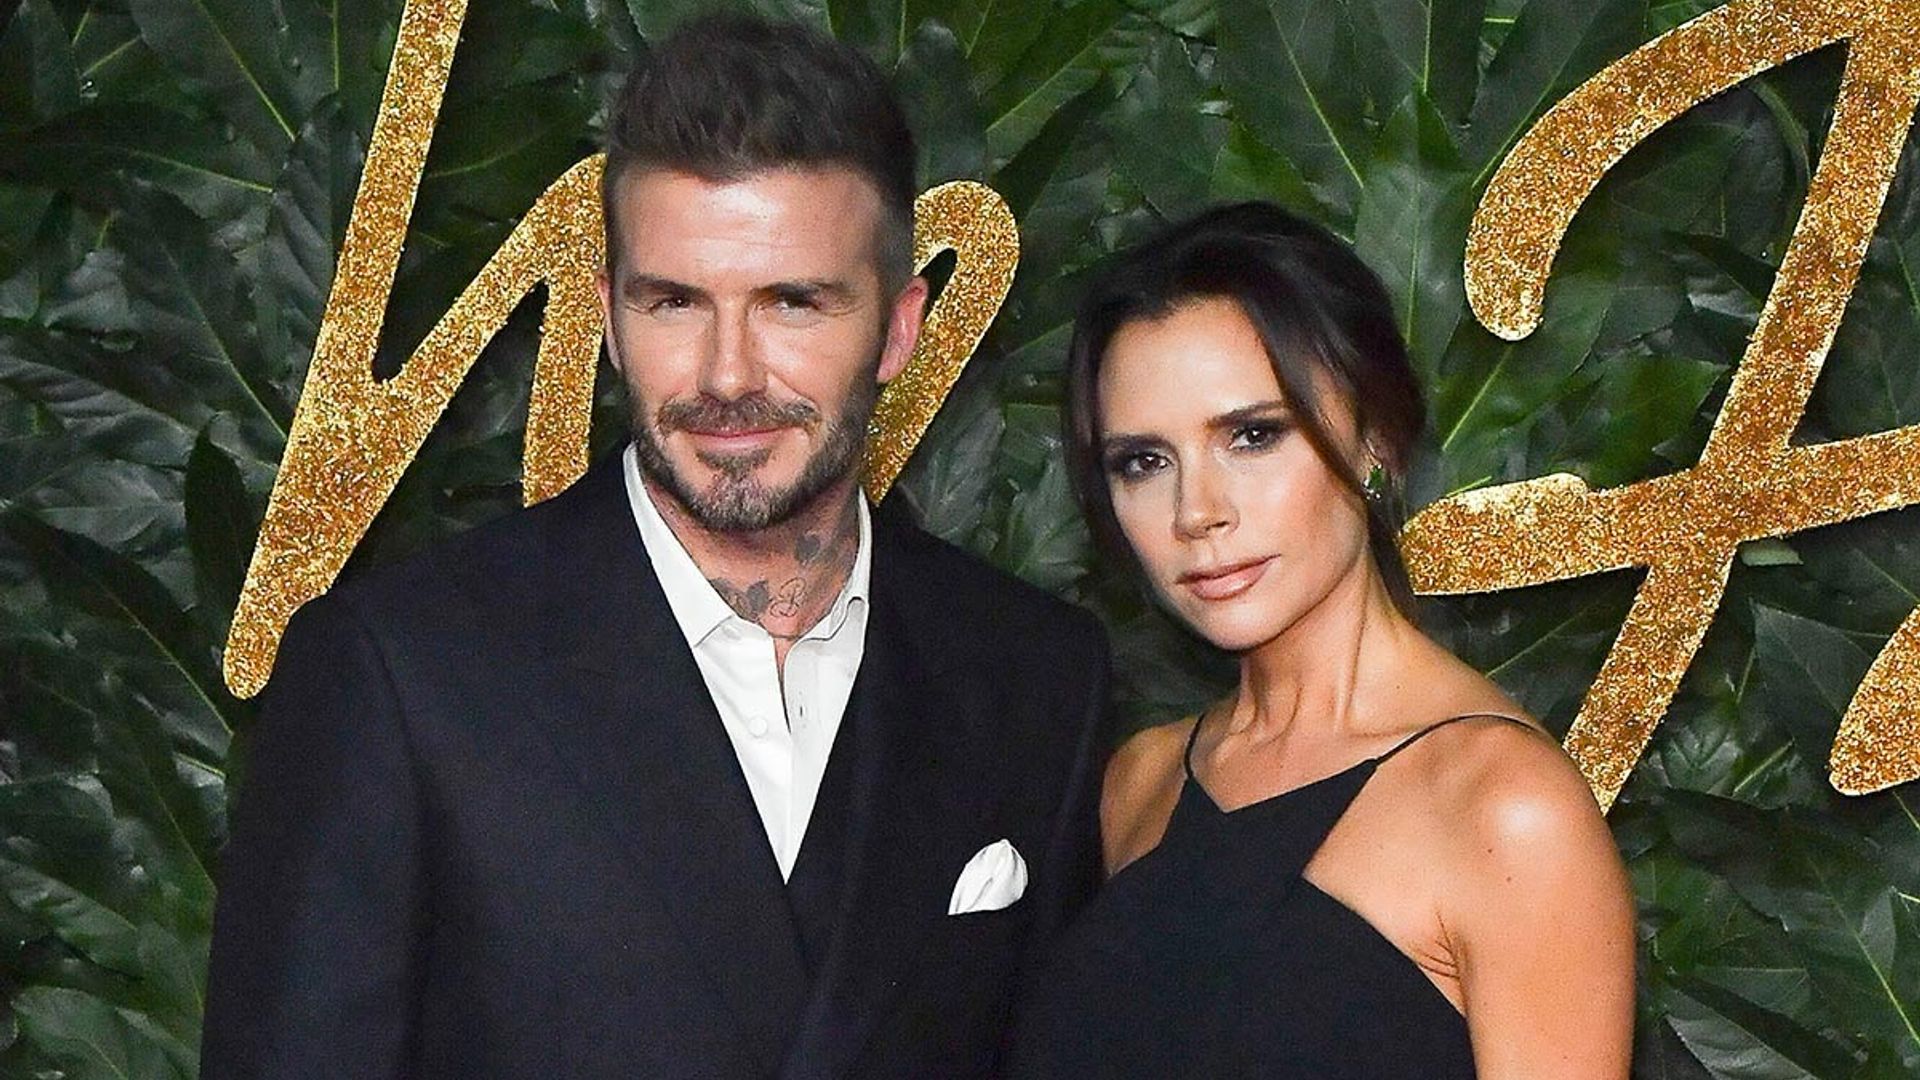 David and Victoria Beckham’s pre-wedding day activities with family revealed